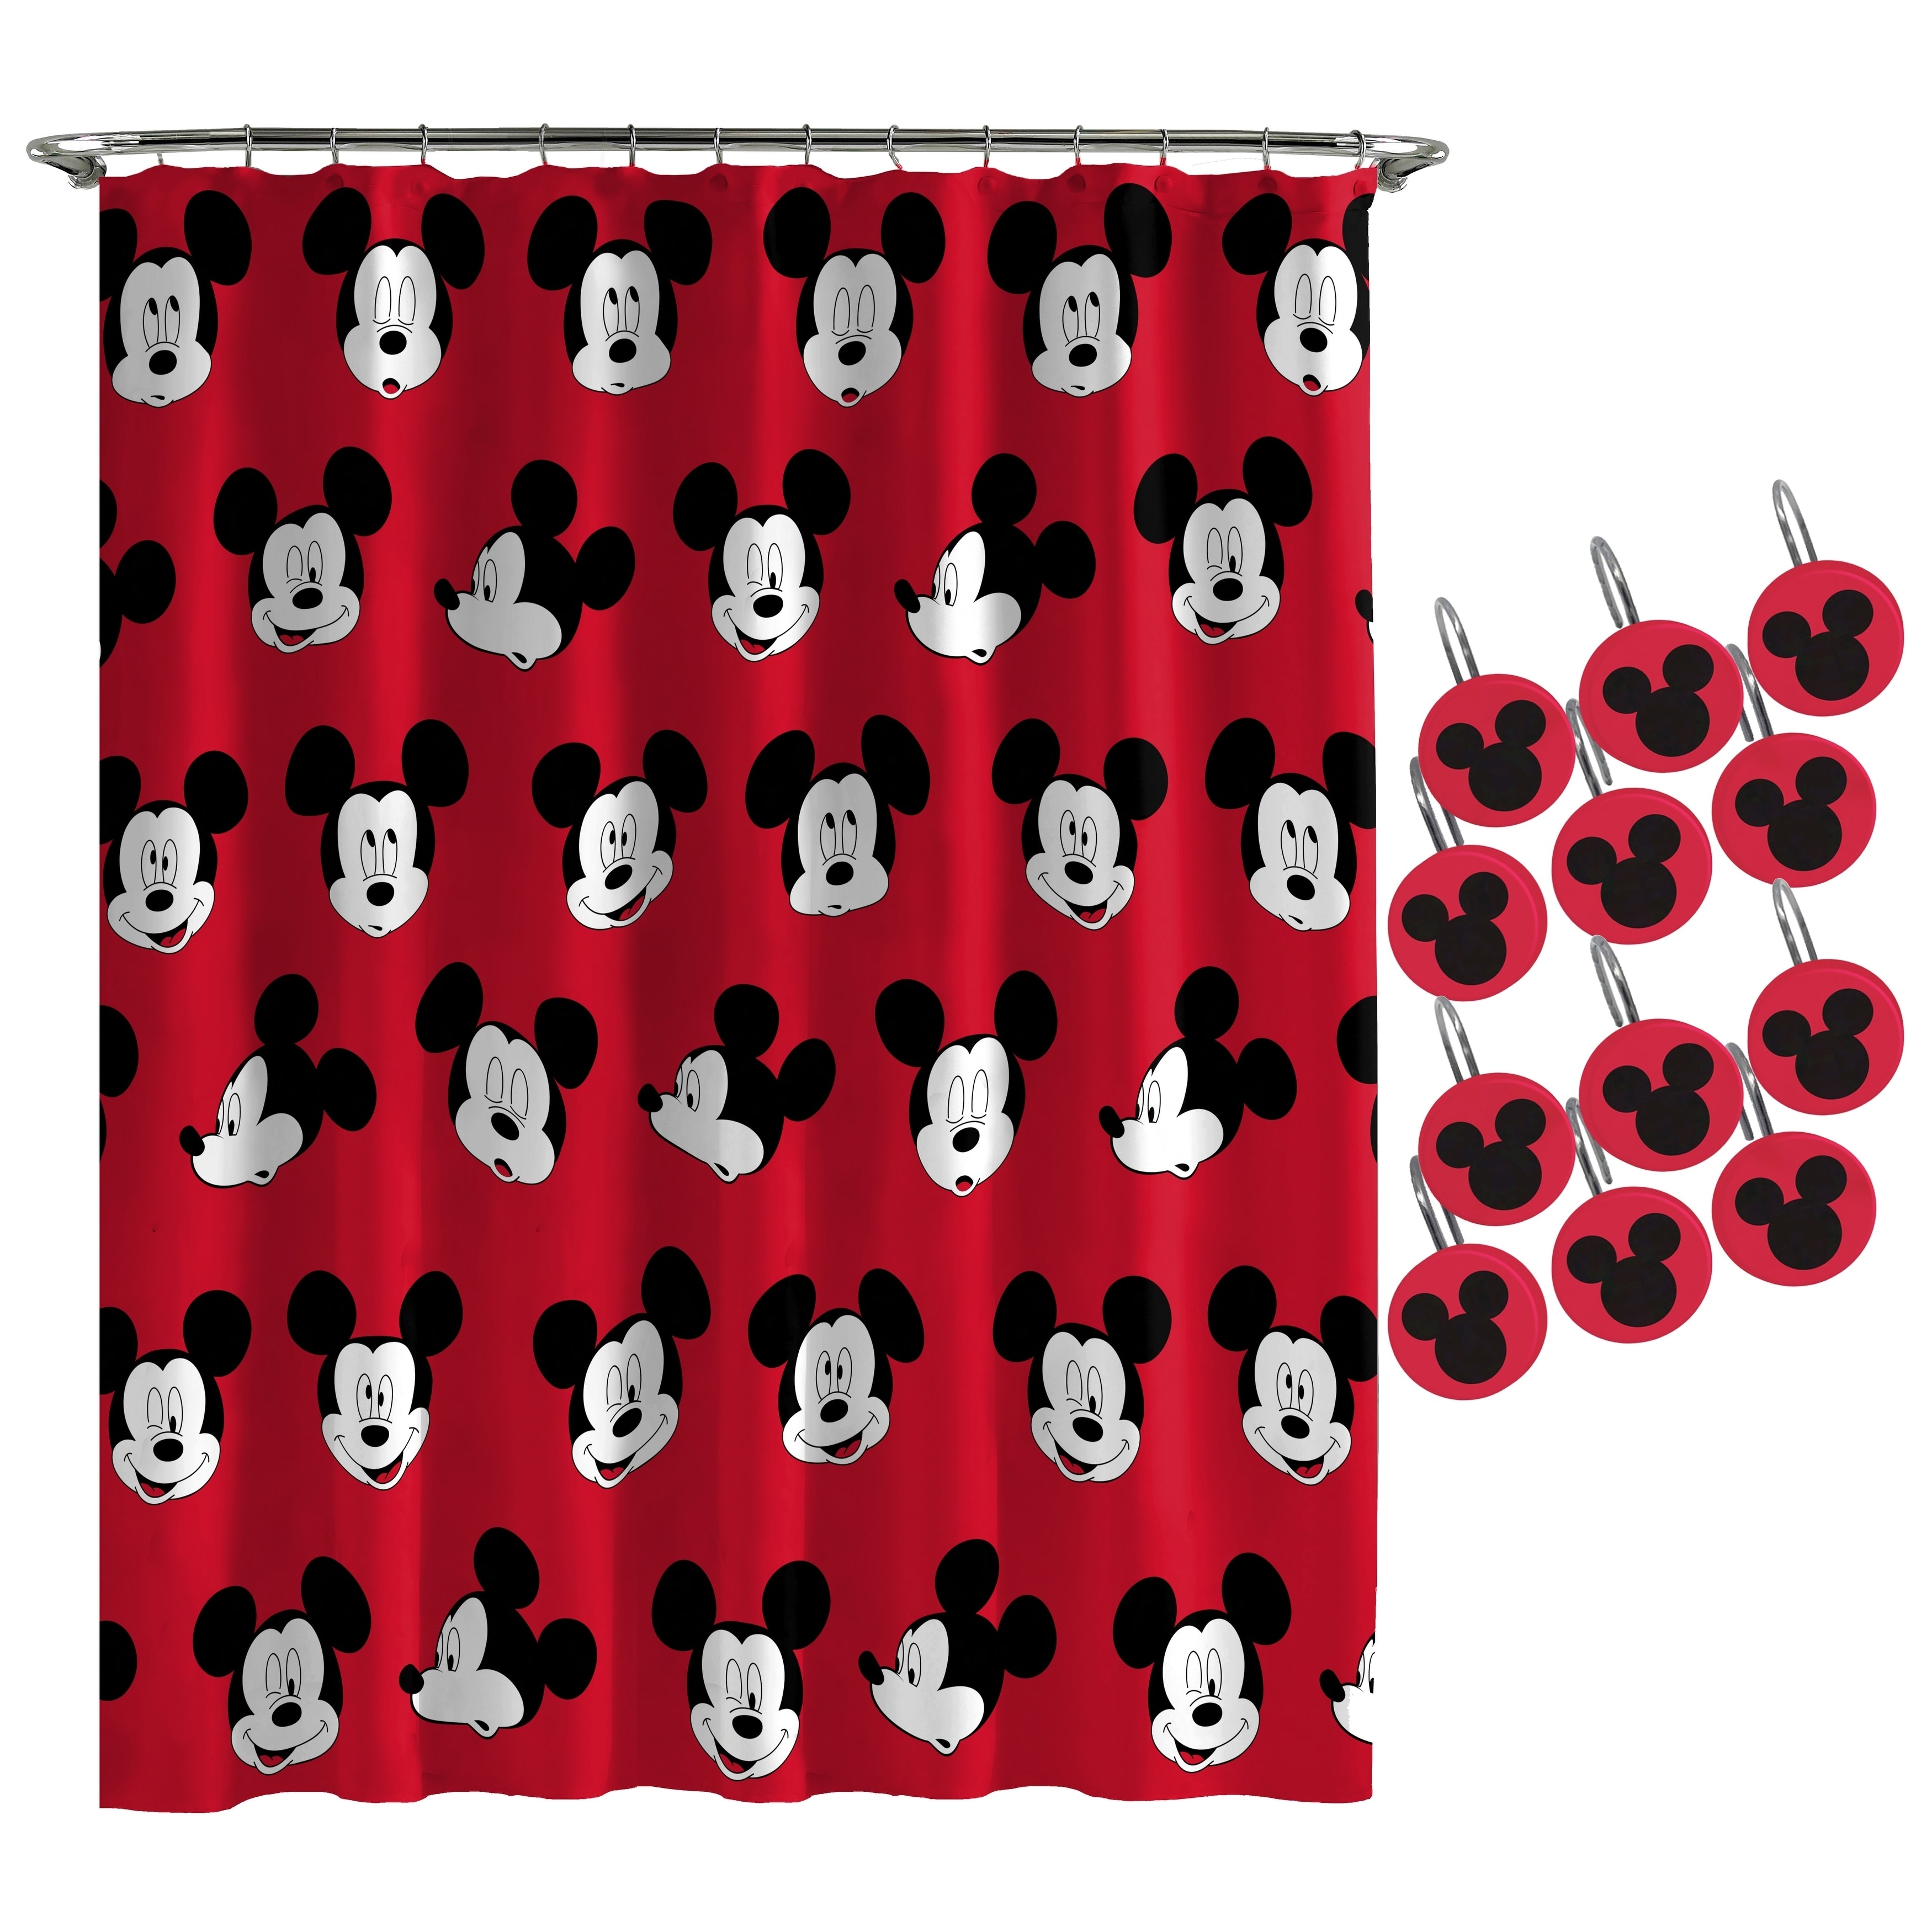 Elegant mickey valance Red White And Gray Mickey Mouse Head Curtain Valance Curtains Blinds Shutters Home Decor Guardebem Com